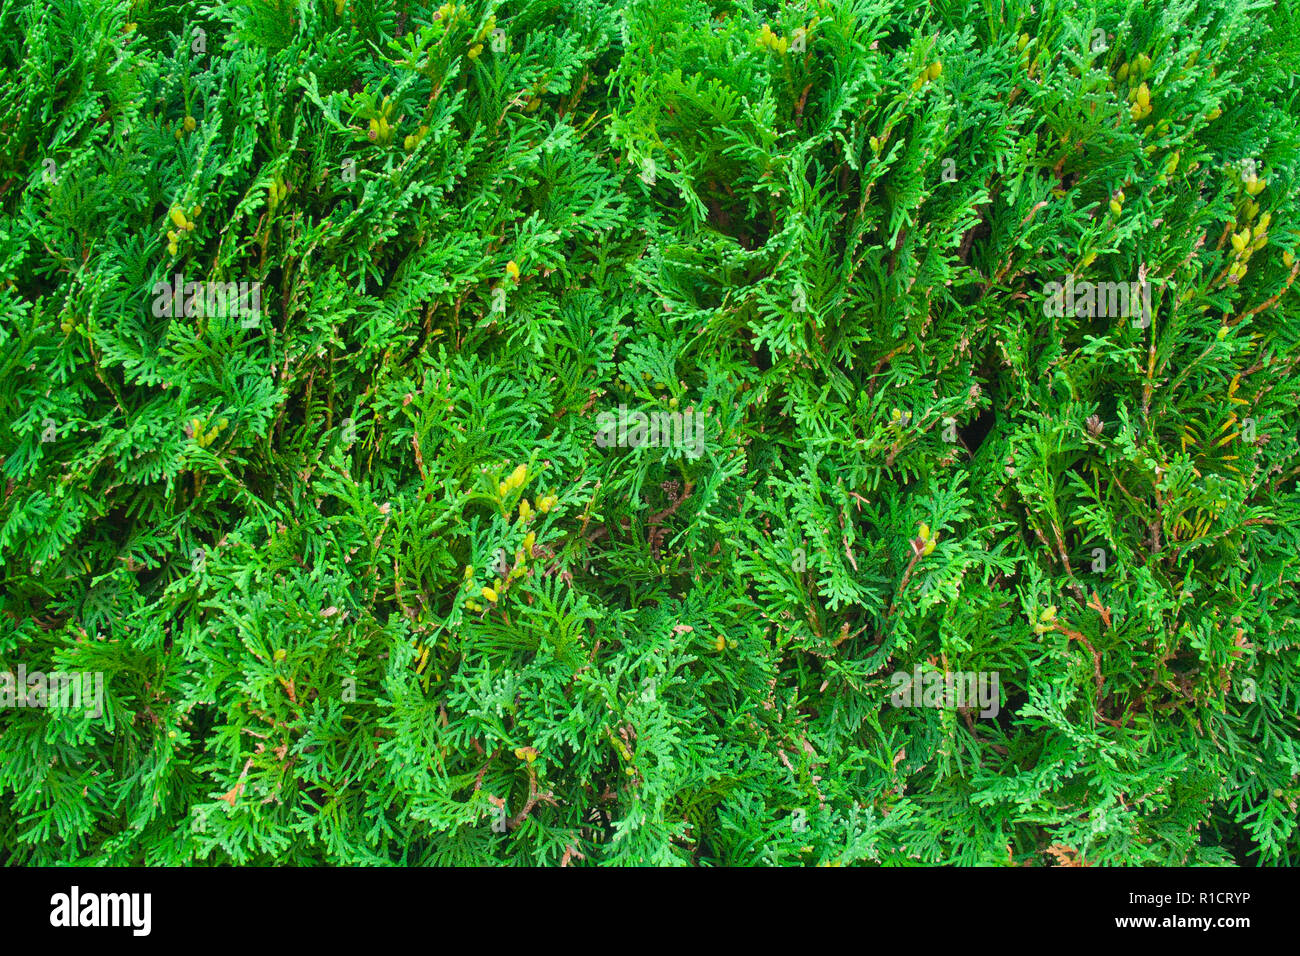 Green wall of juniper close up. Place for text on green juniper Stock Photo